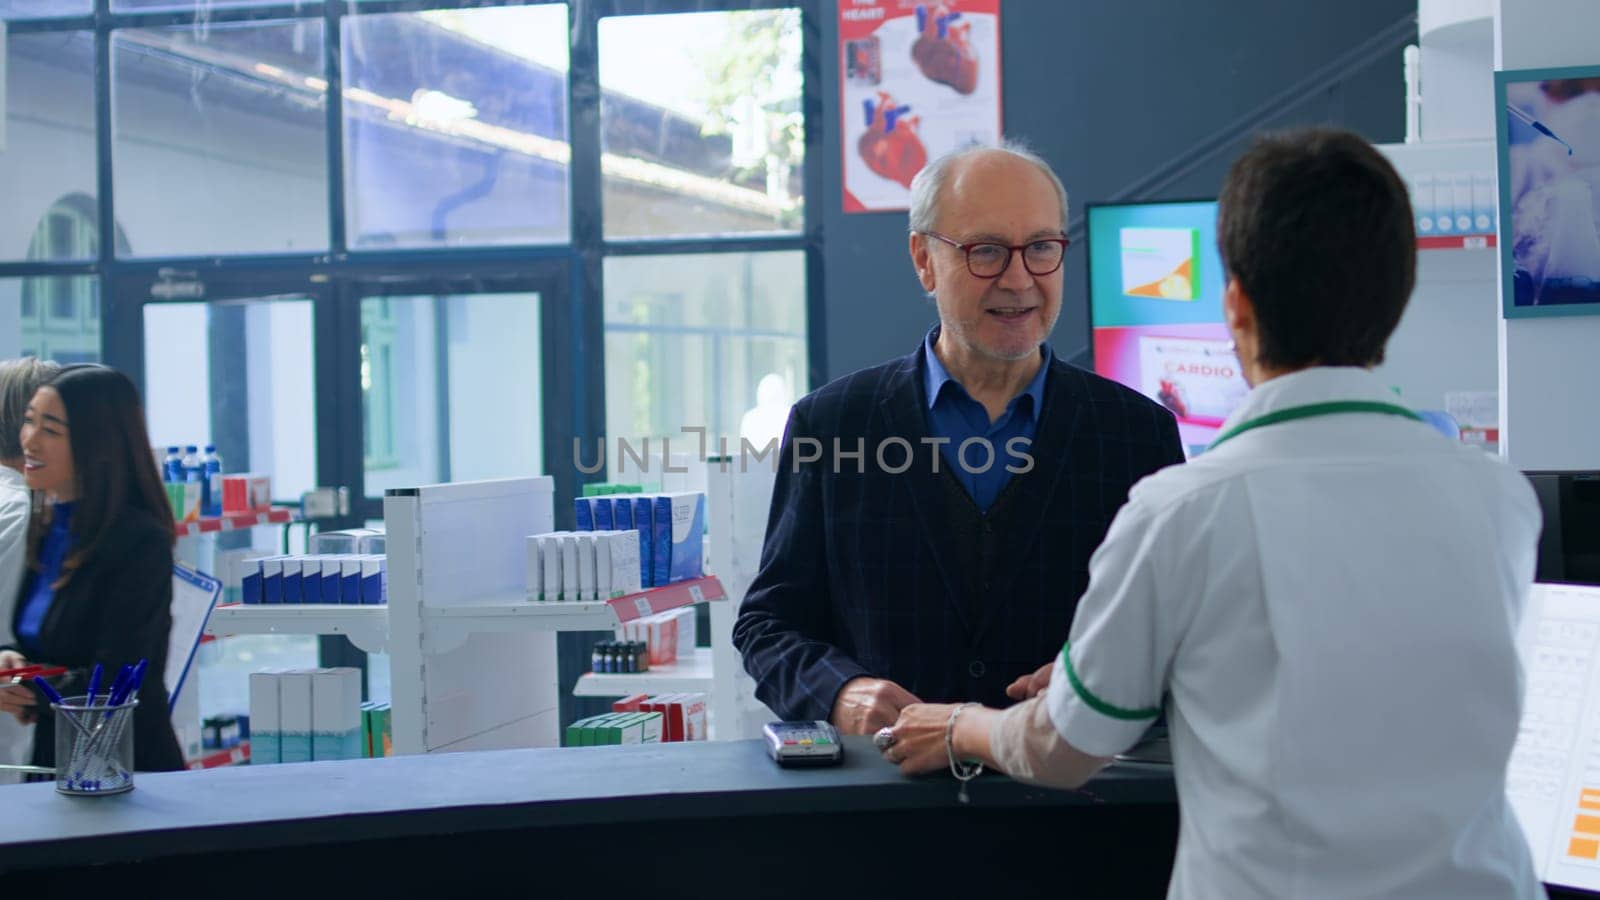 Senior shopper arriving at drugstore checkout counter after finding needed pharmaceutical items, purchasing pain relieving pills with credit card, being helped by chemist assistant with shopping bag